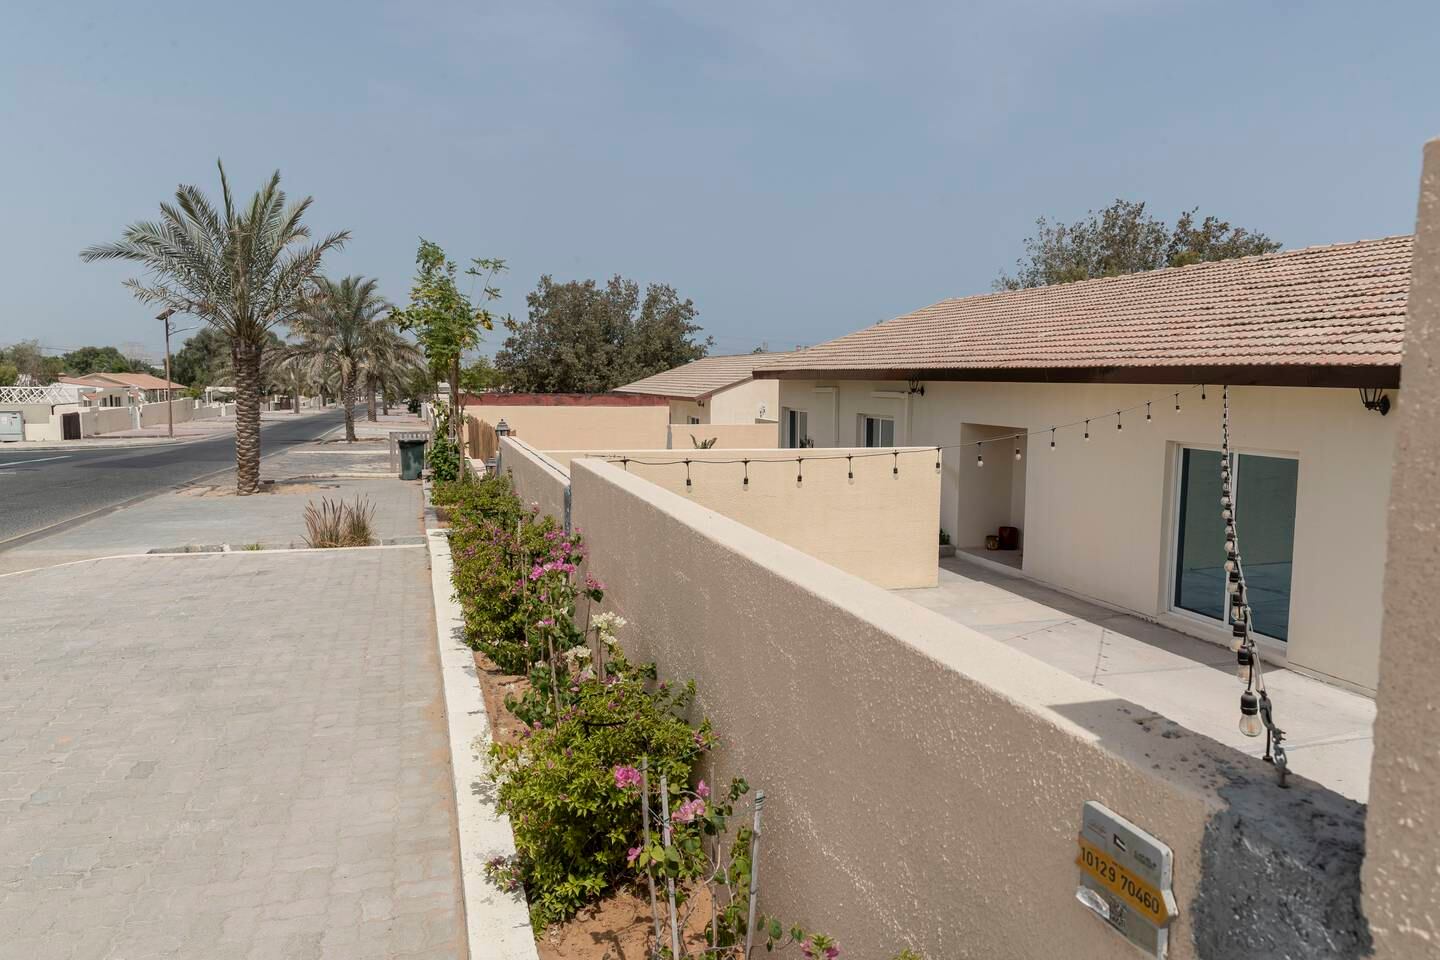 There are 290 villas in Jebel Ali Village, with mainly two, three and four bedrooms.